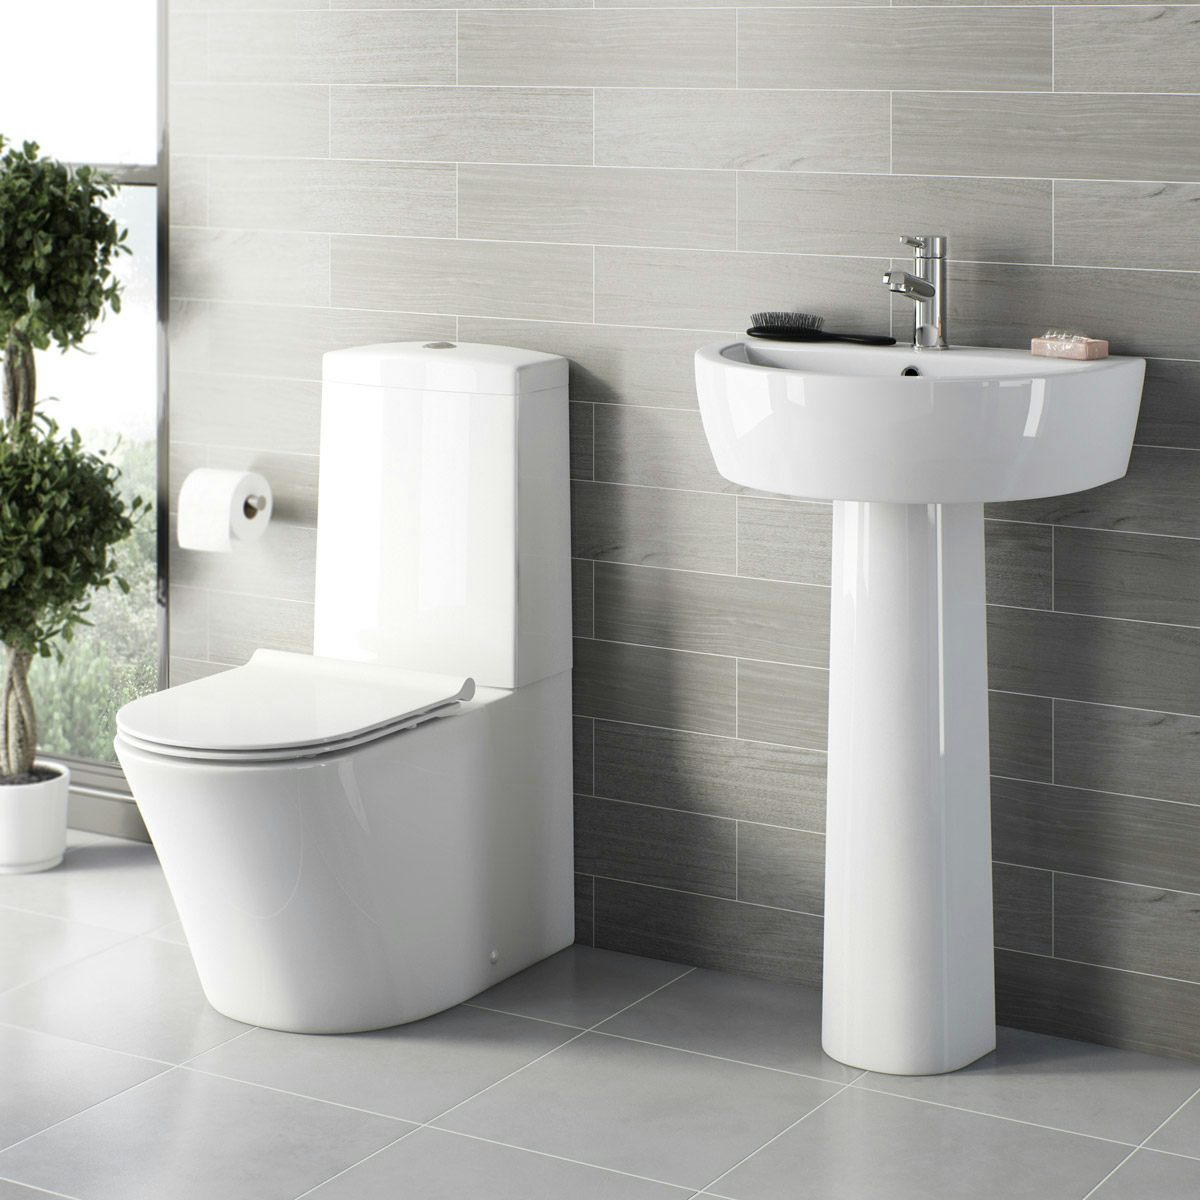 Mode Tate cloakroom suite with pedestal basin 550mm